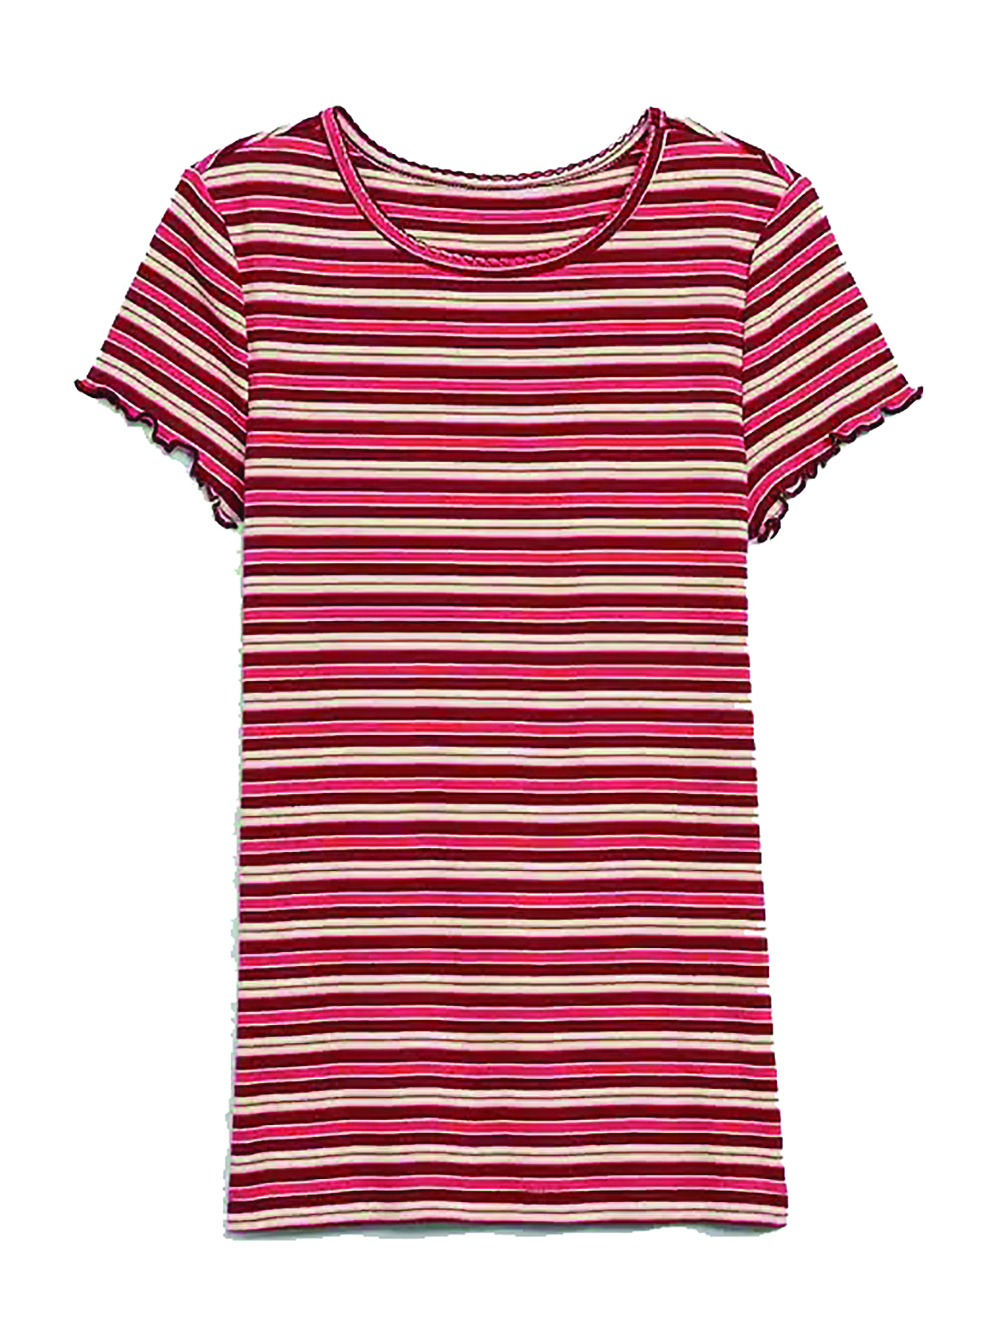 GAP: Girls' Ribbed Tee $2.40, Uniform L/S Polo $3, S/S Polo $4.20, Boys' S/S Poplin Shirt $6.60, Original Jeans $9.60 & MORE + Free Curbside Pickup / FS from $30+